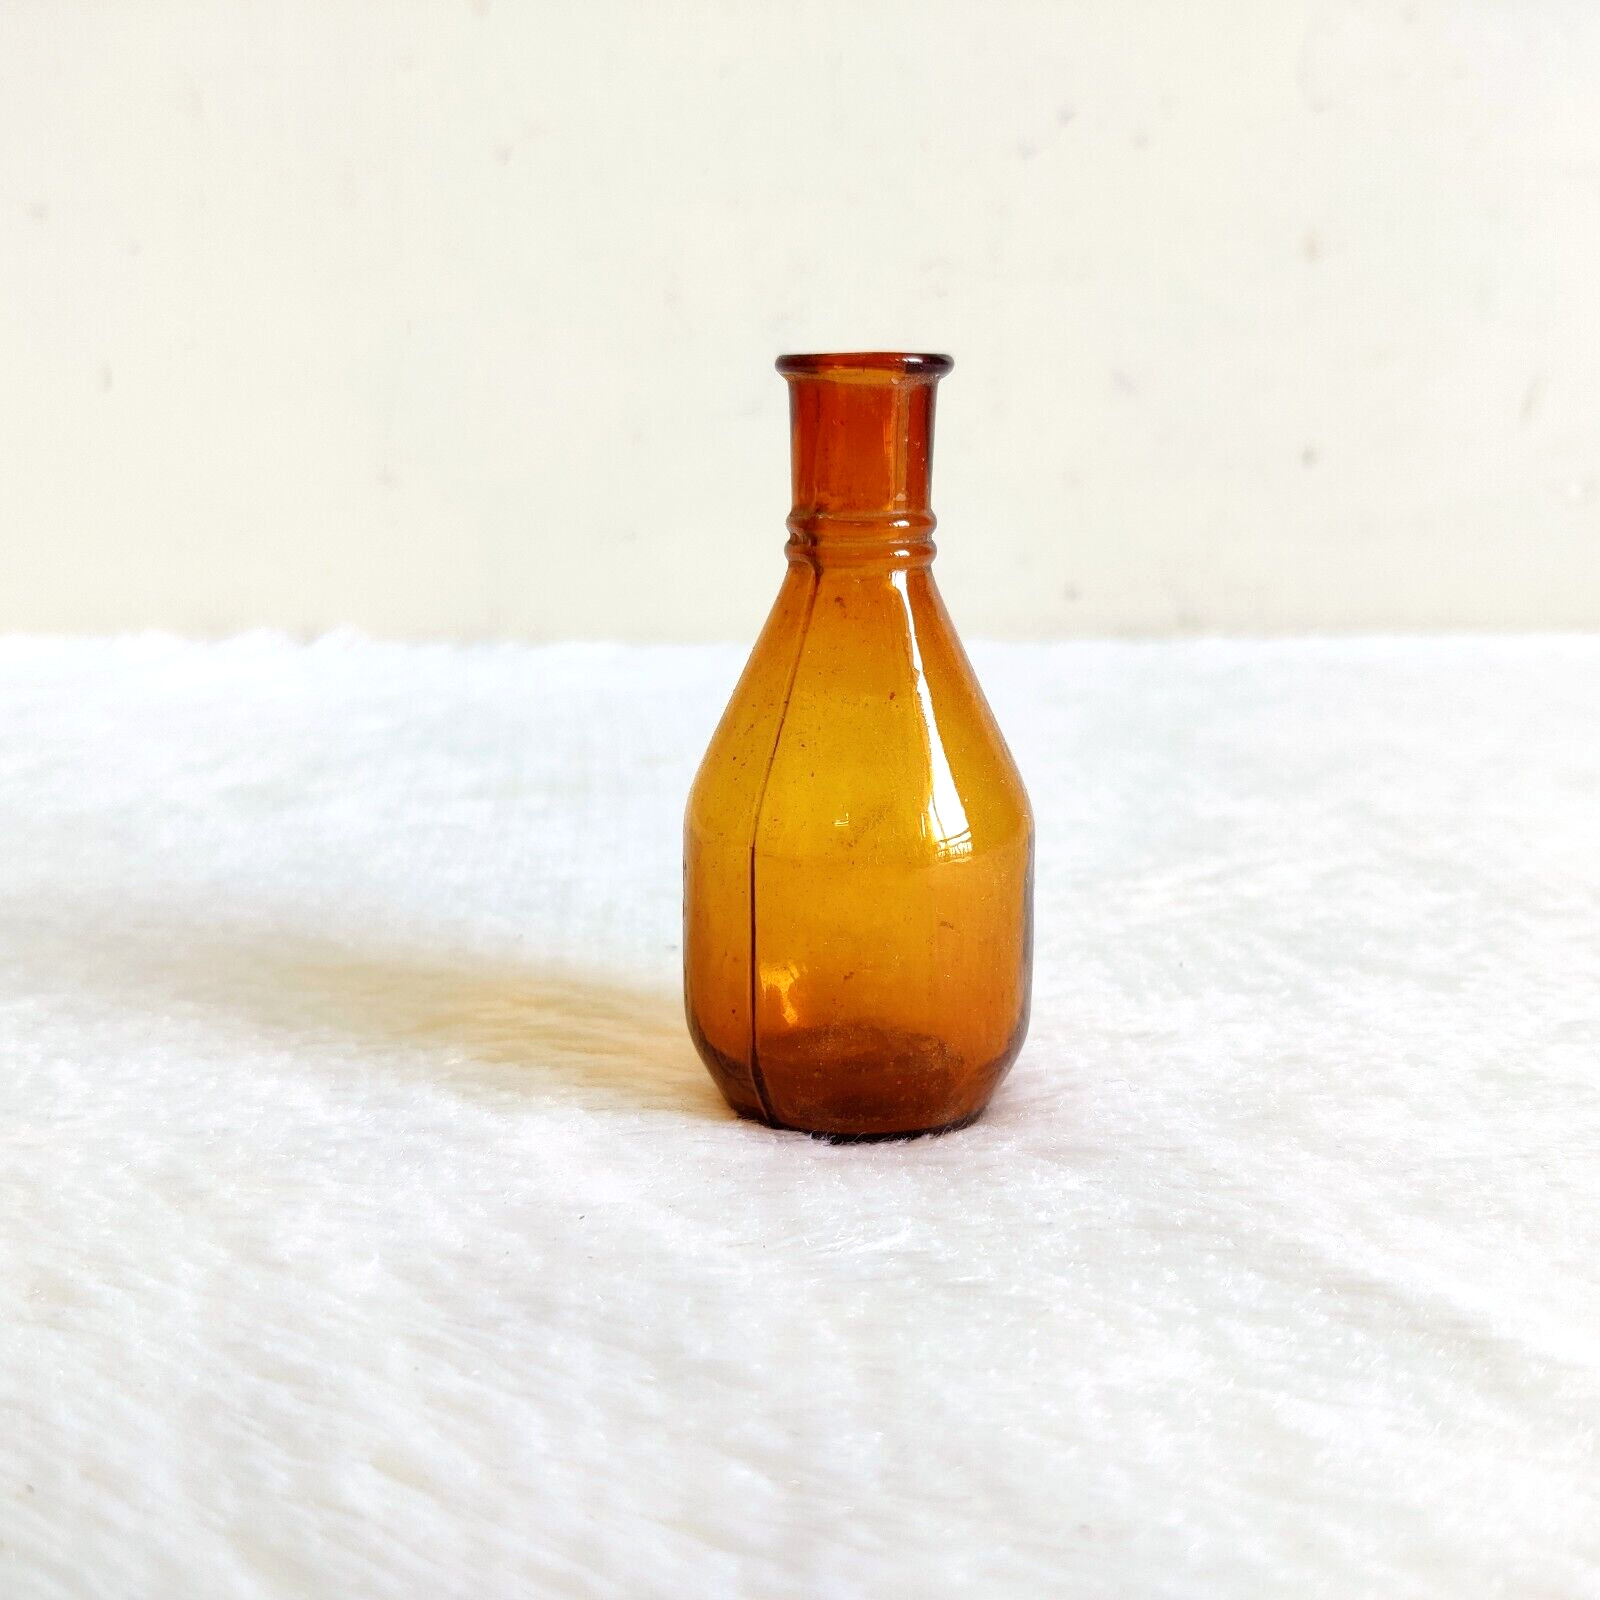 1930s Vintage Amber Glass Bottle Old Decorative Collectible G834